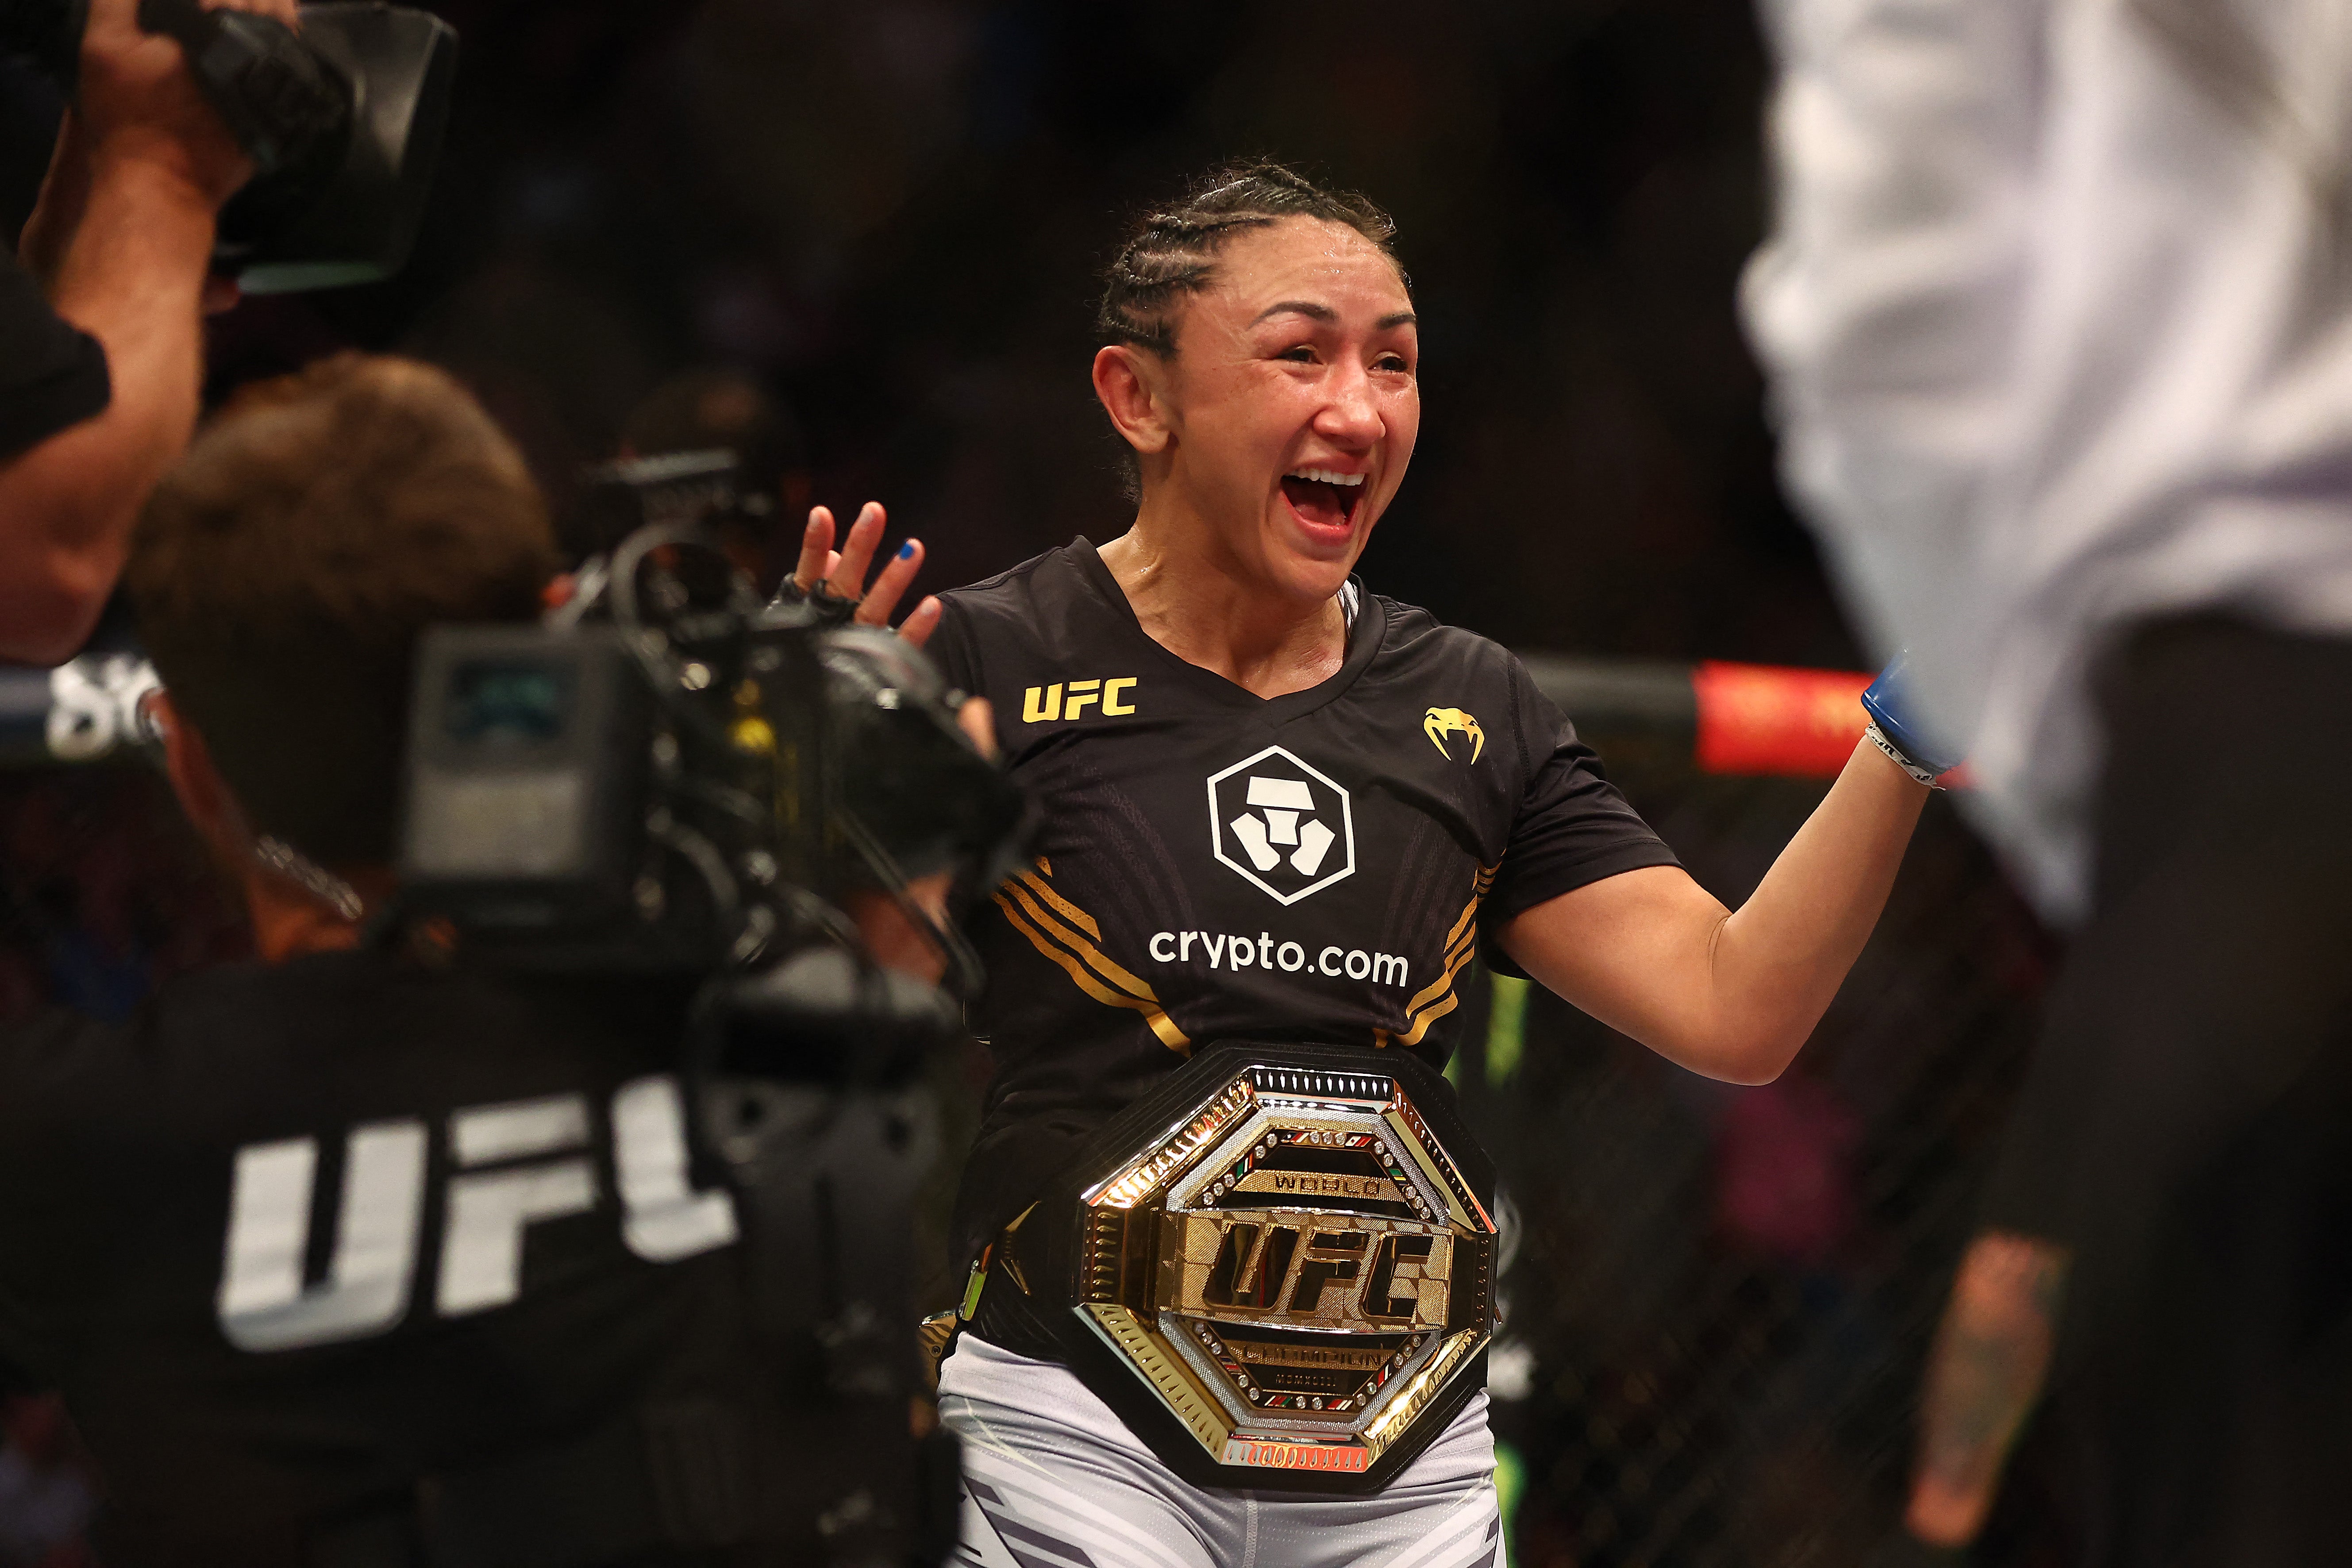 Carla Esparza celebrates becoming a two-time UFC strawweight champion